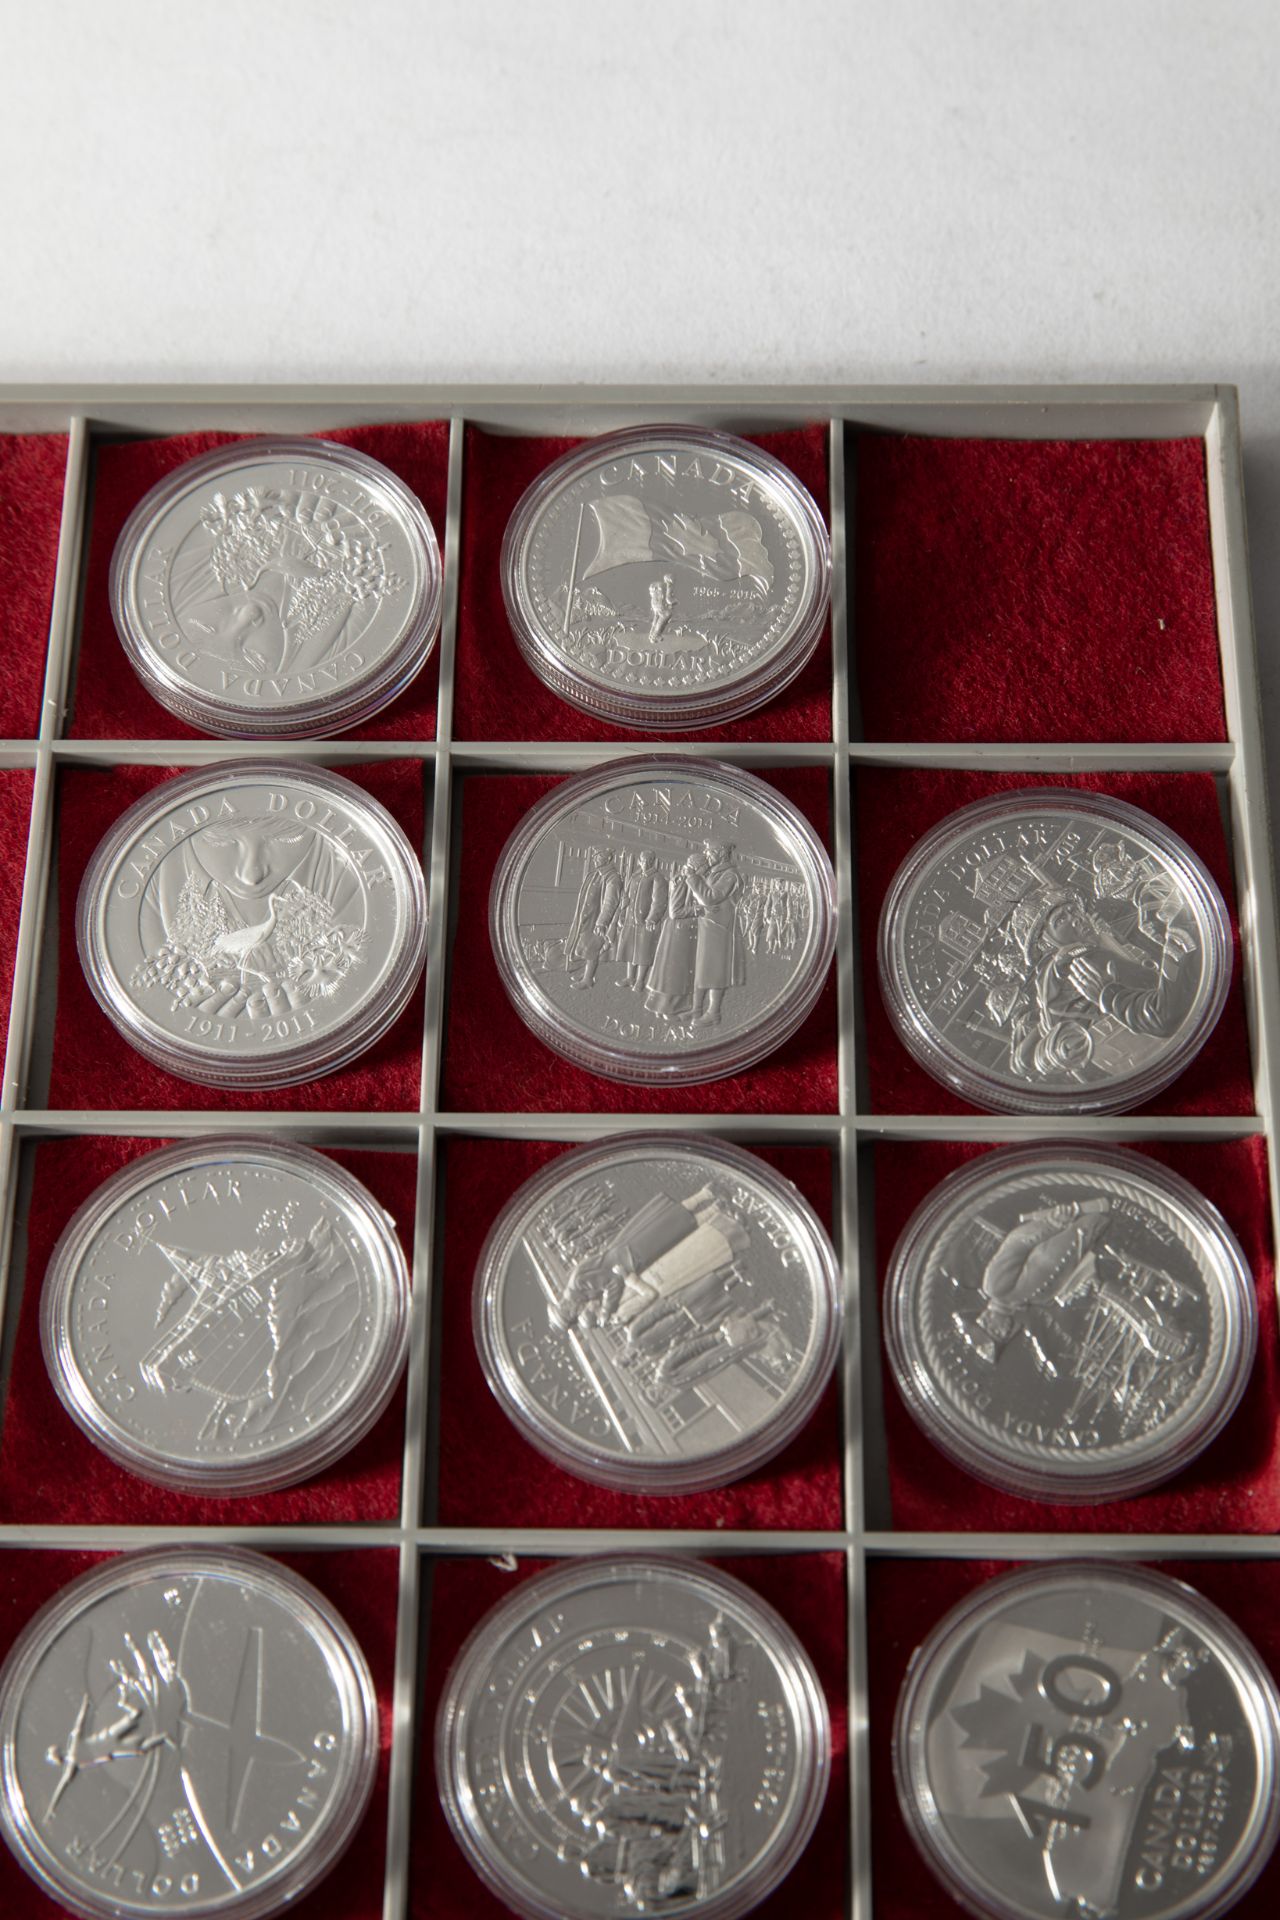 89 silver dollars Canada, 1949-2019 - Image 19 of 37